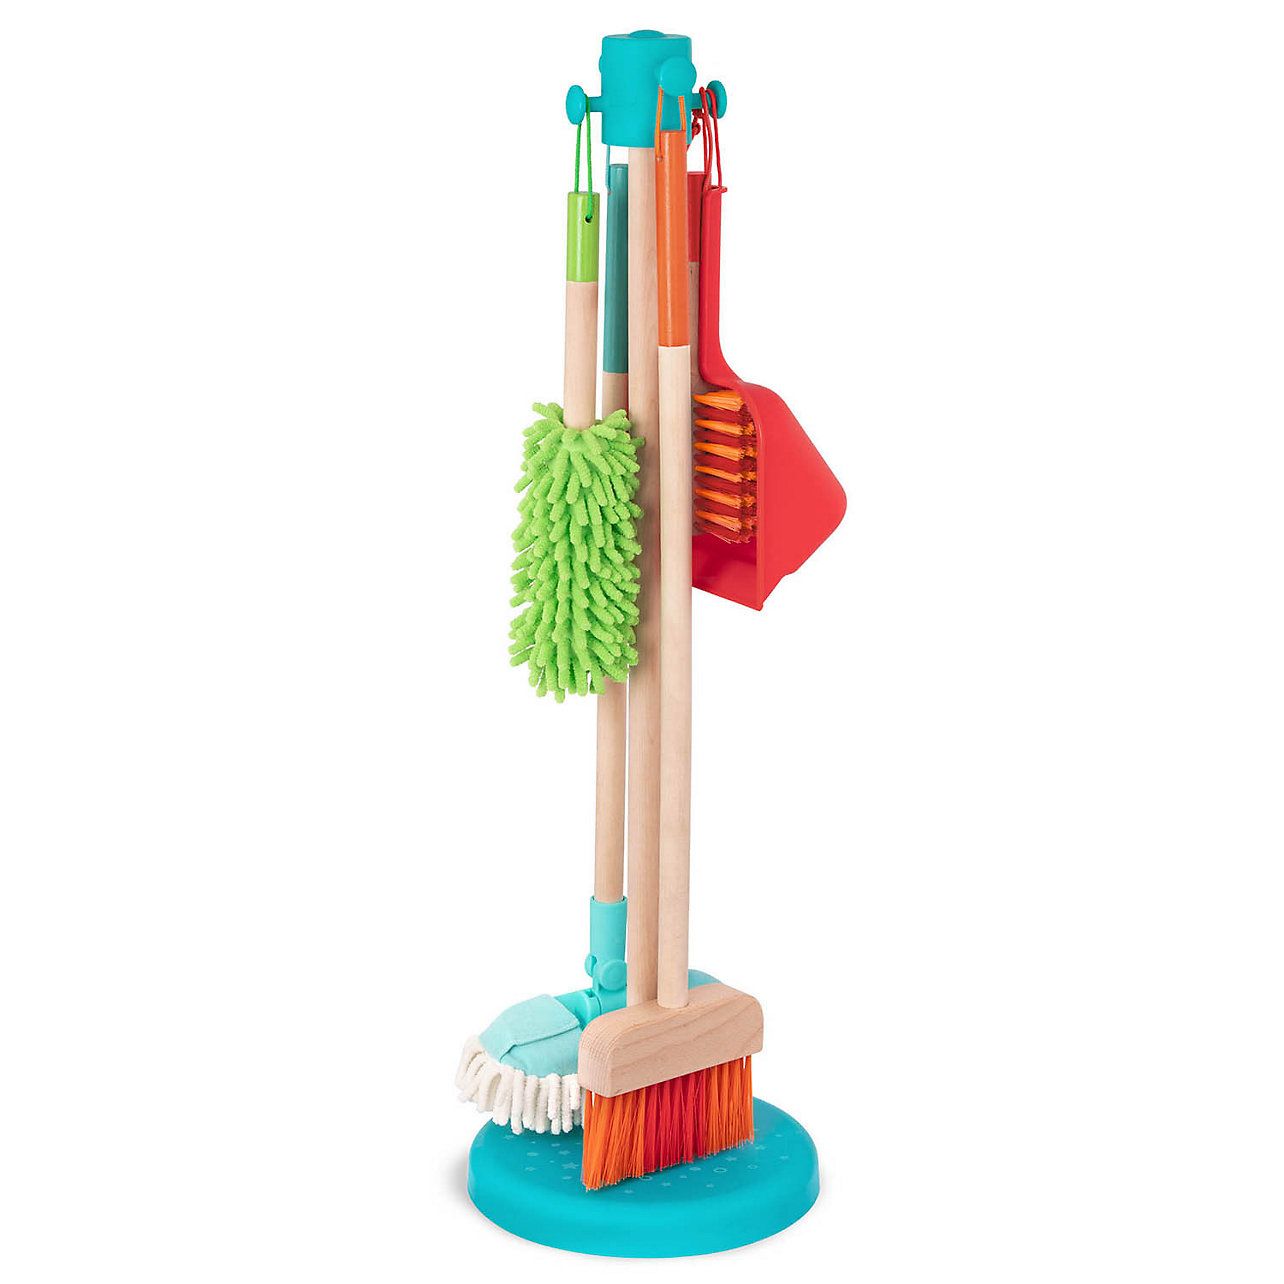 Battat Sweep N' Clean Play Cleaning Playset | Kohl's